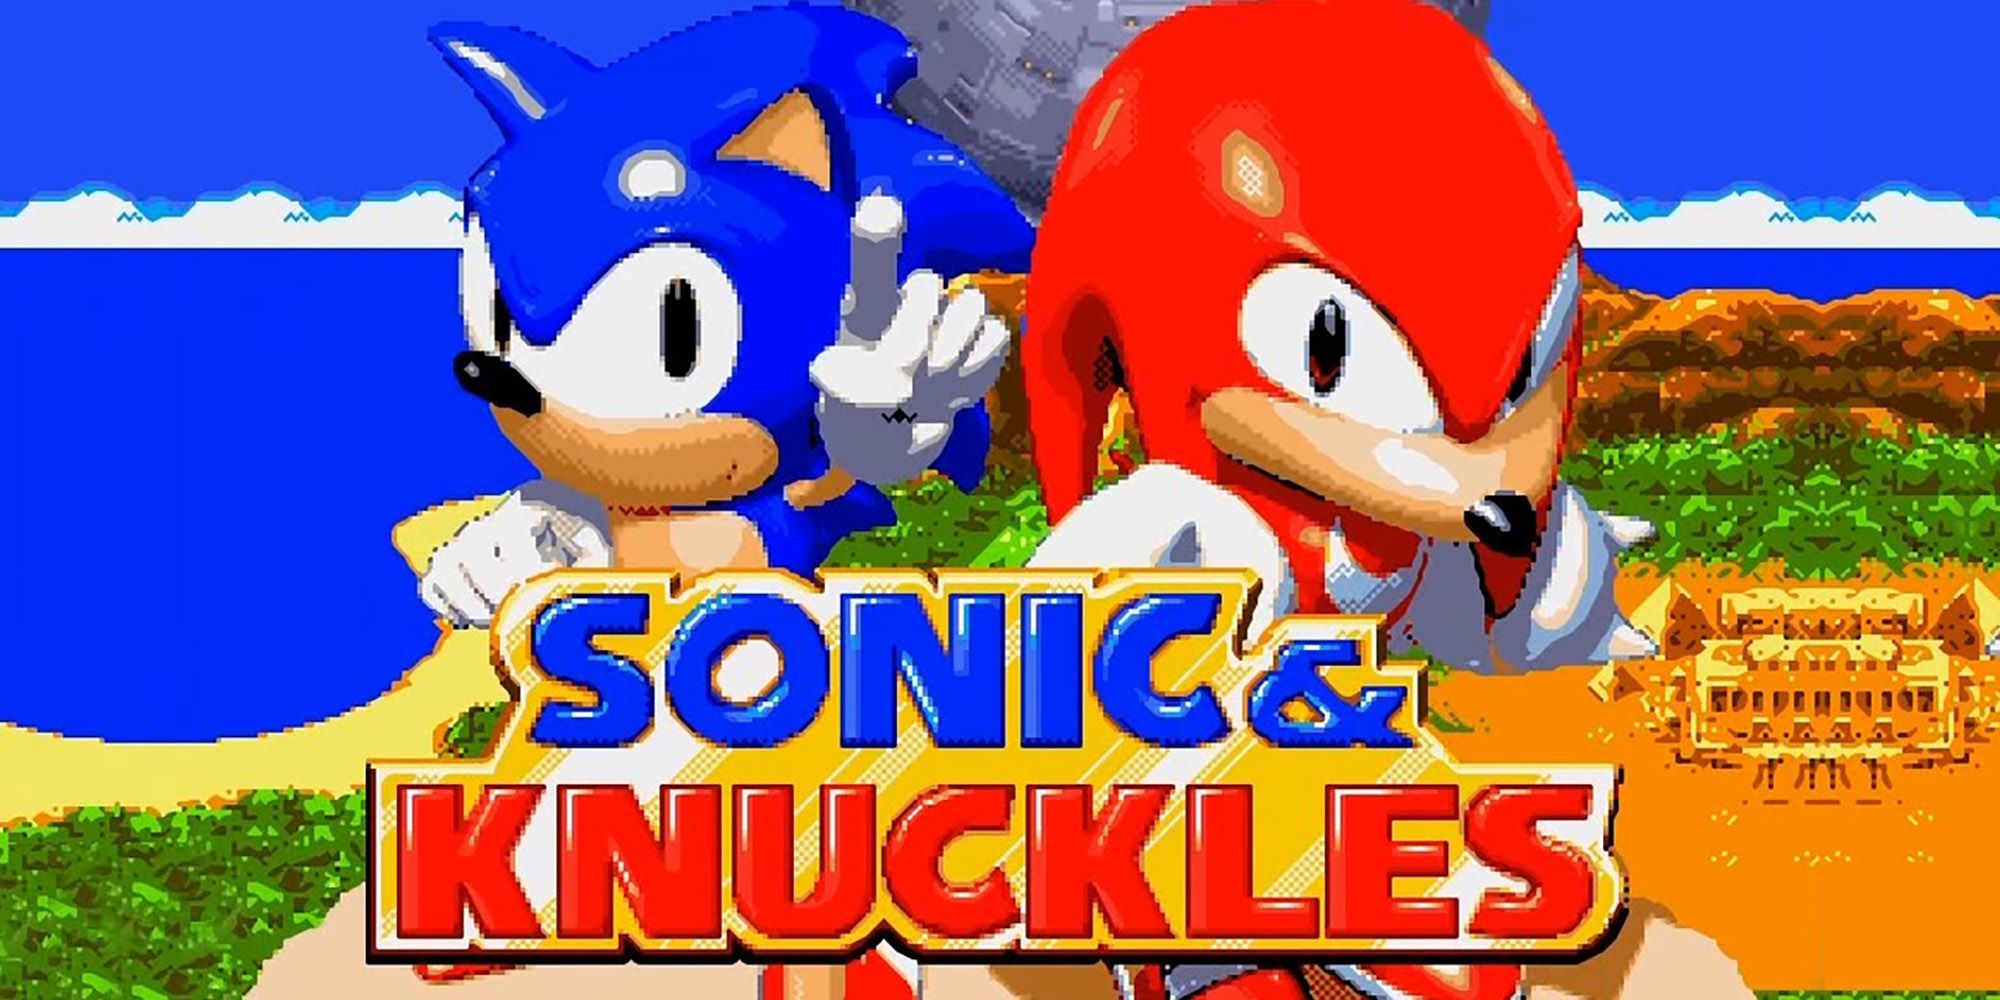 Sonic &amp; Knuckles title screen cropped